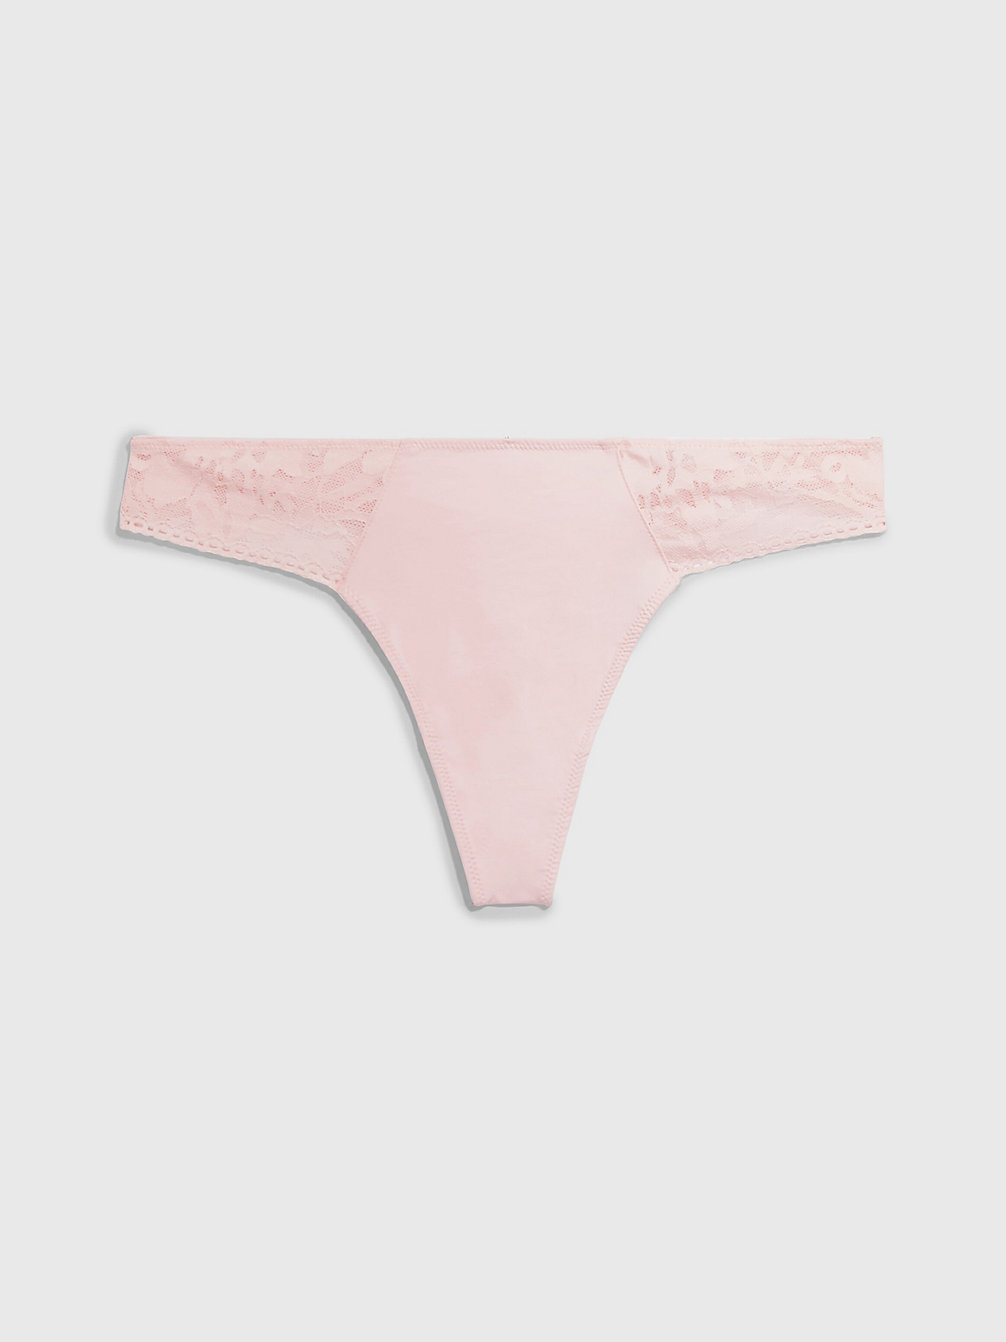 Perizoma - Ultra Soft Lace > PINK > undefined donna > Calvin Klein